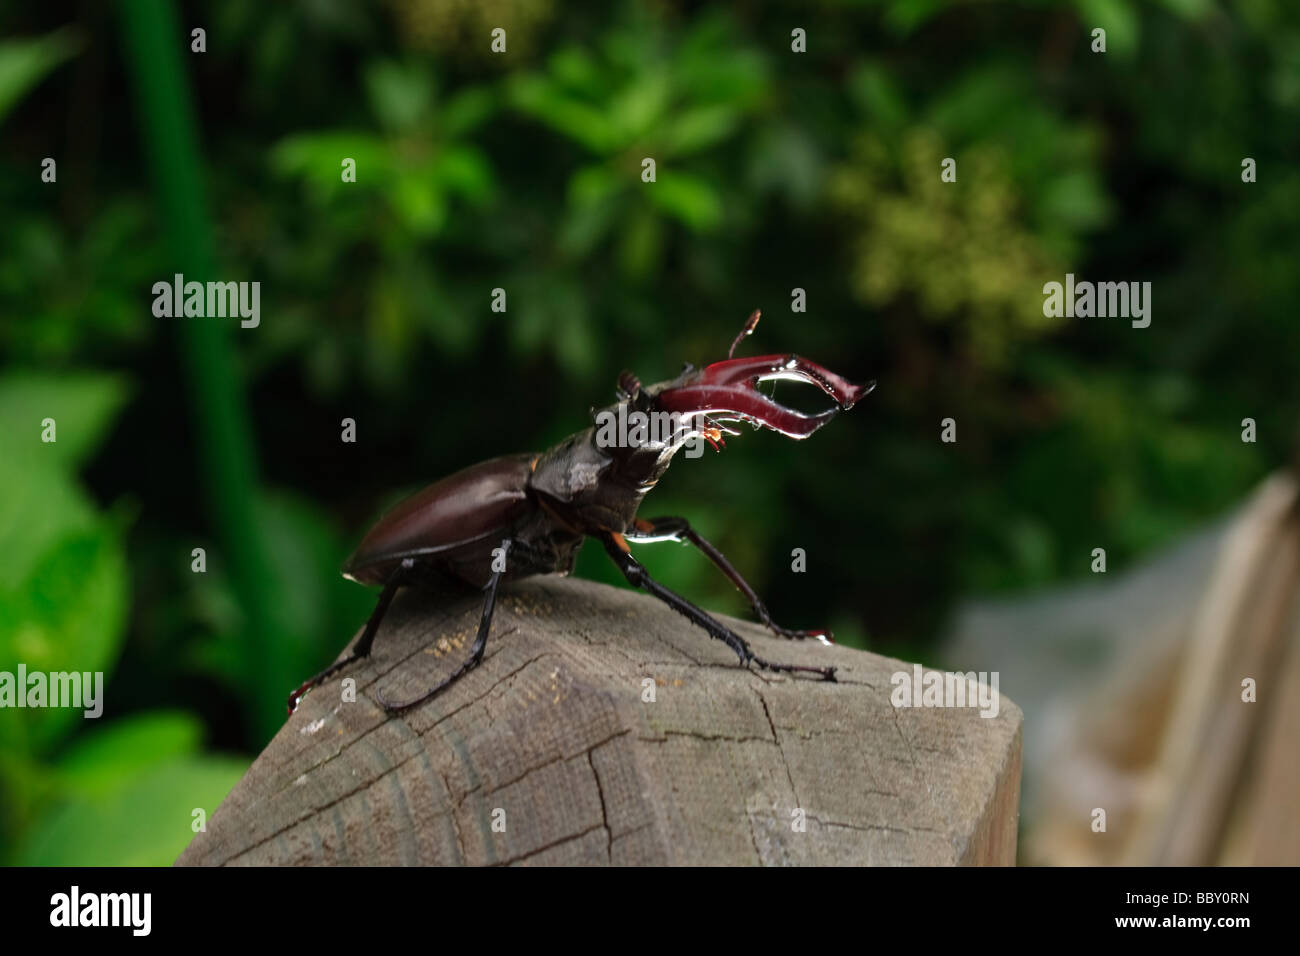 A male stag beetle in the garden Stock Photo